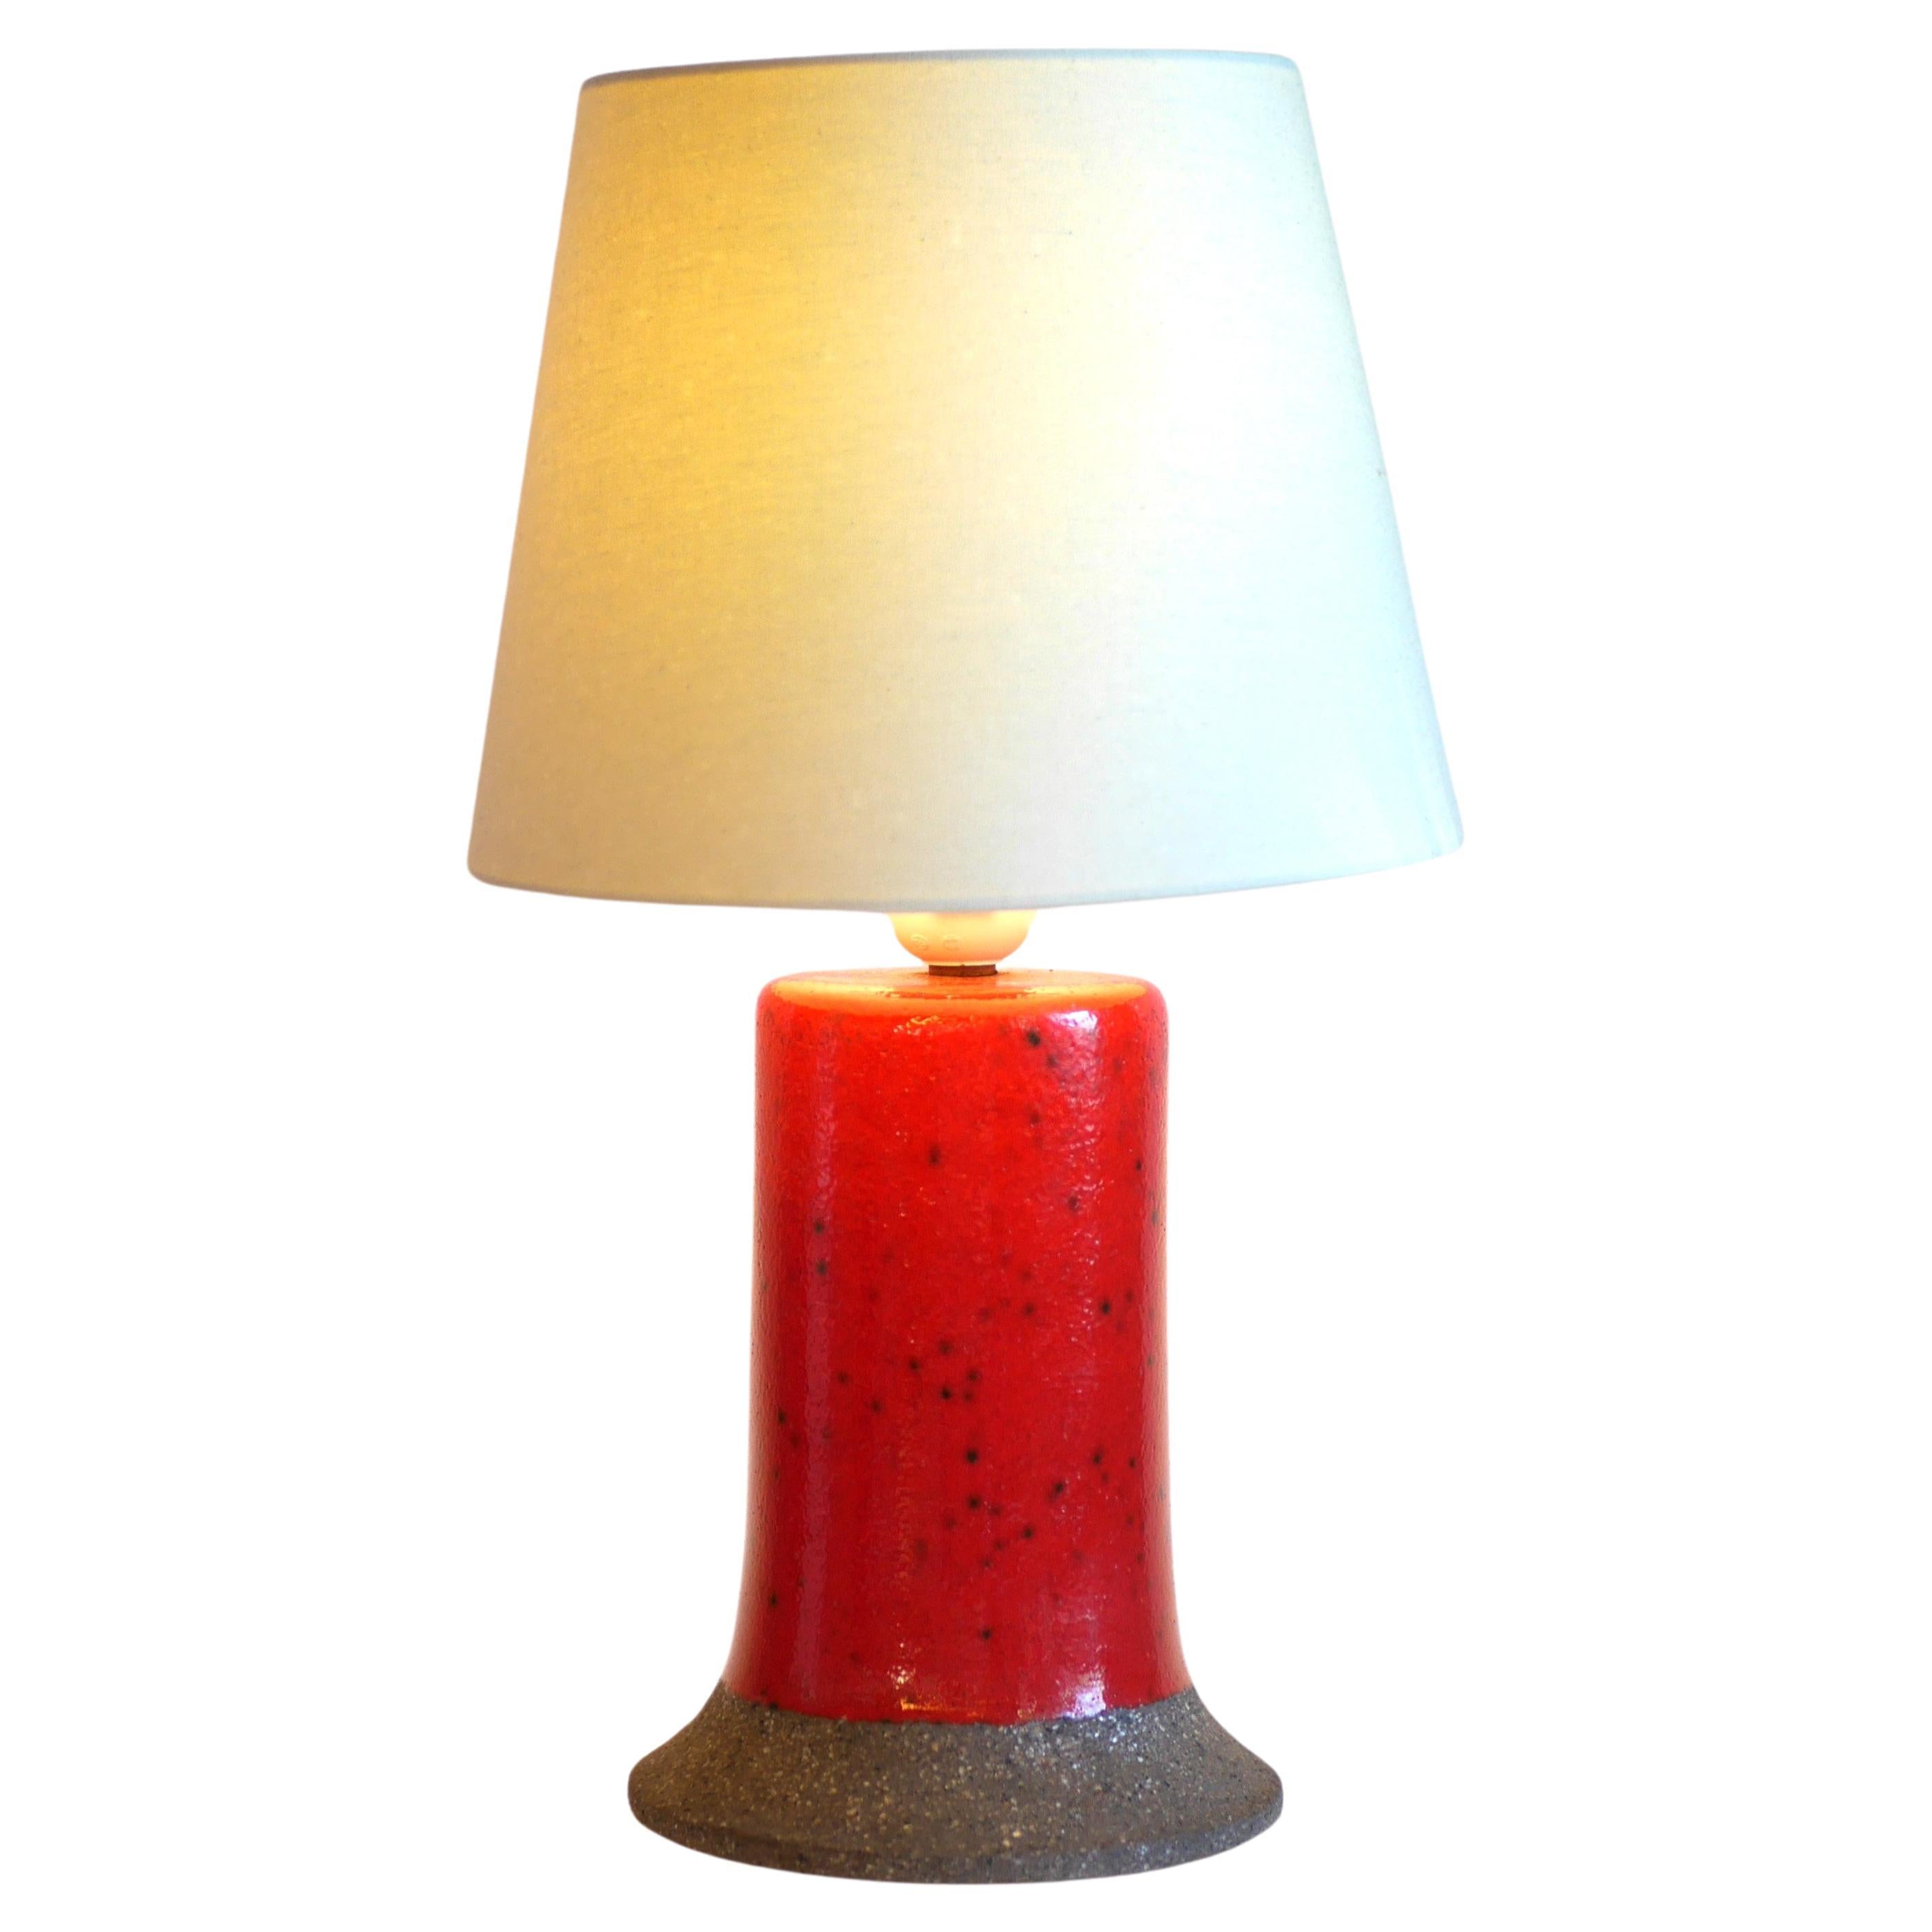 Table lamp by Nittsjö, a bright red pottery lamp By Thomas Hellström For Sale